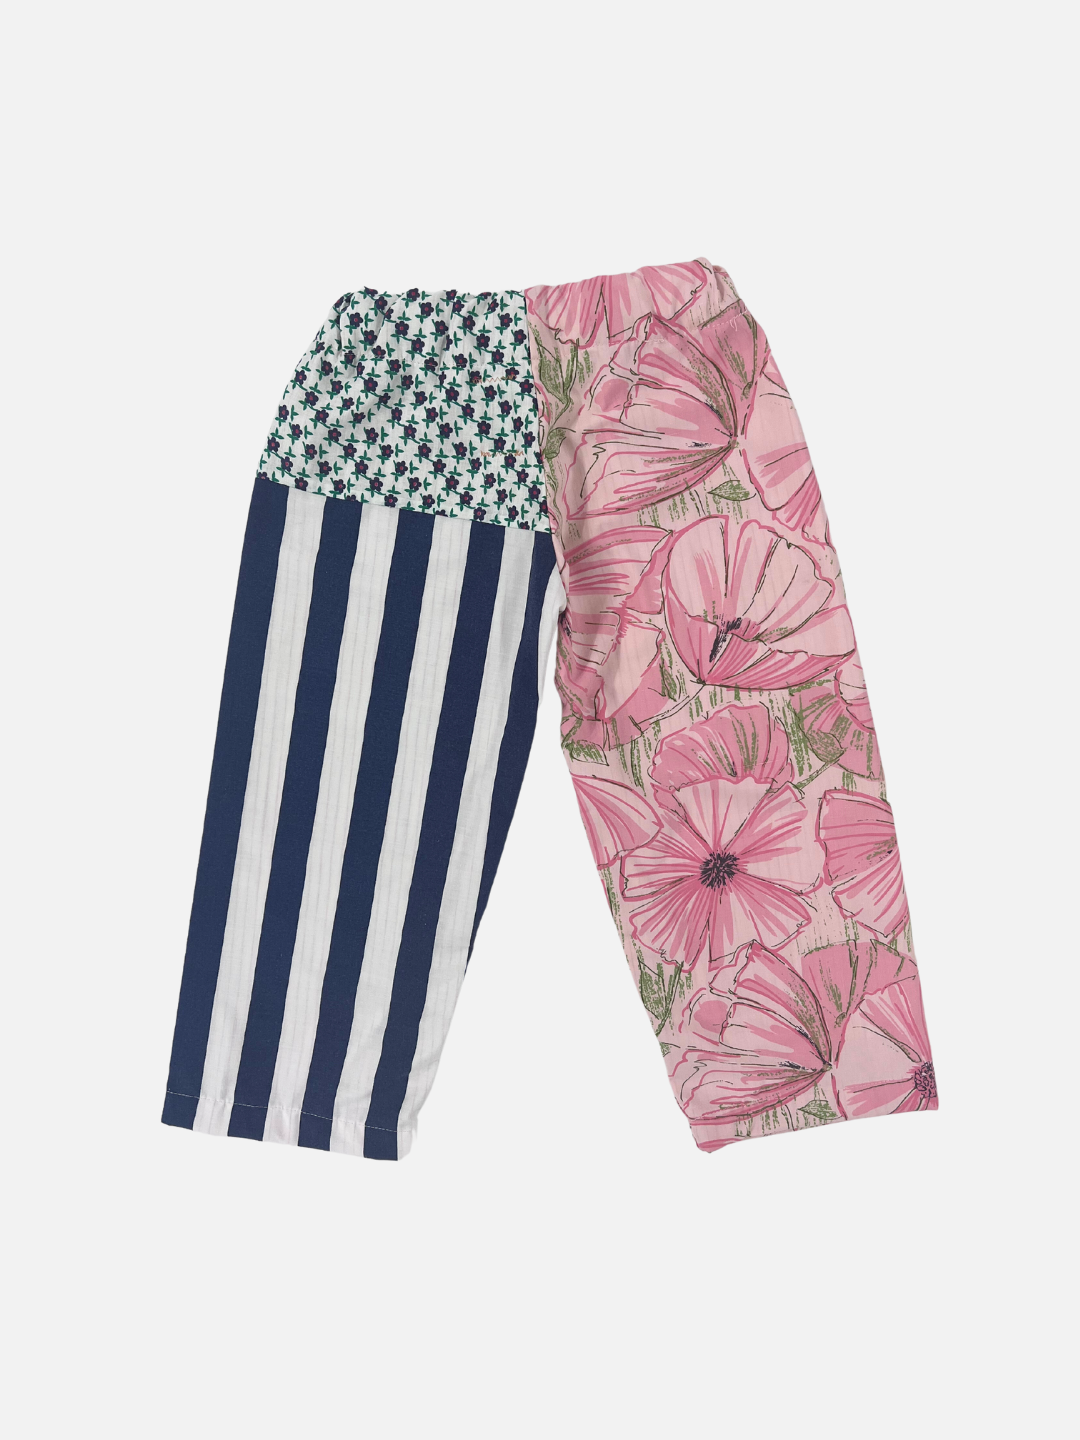 Back view of kid's patchwork pant. Left leg - hibiscus print. Right Leg - navy stripes + little flowers.